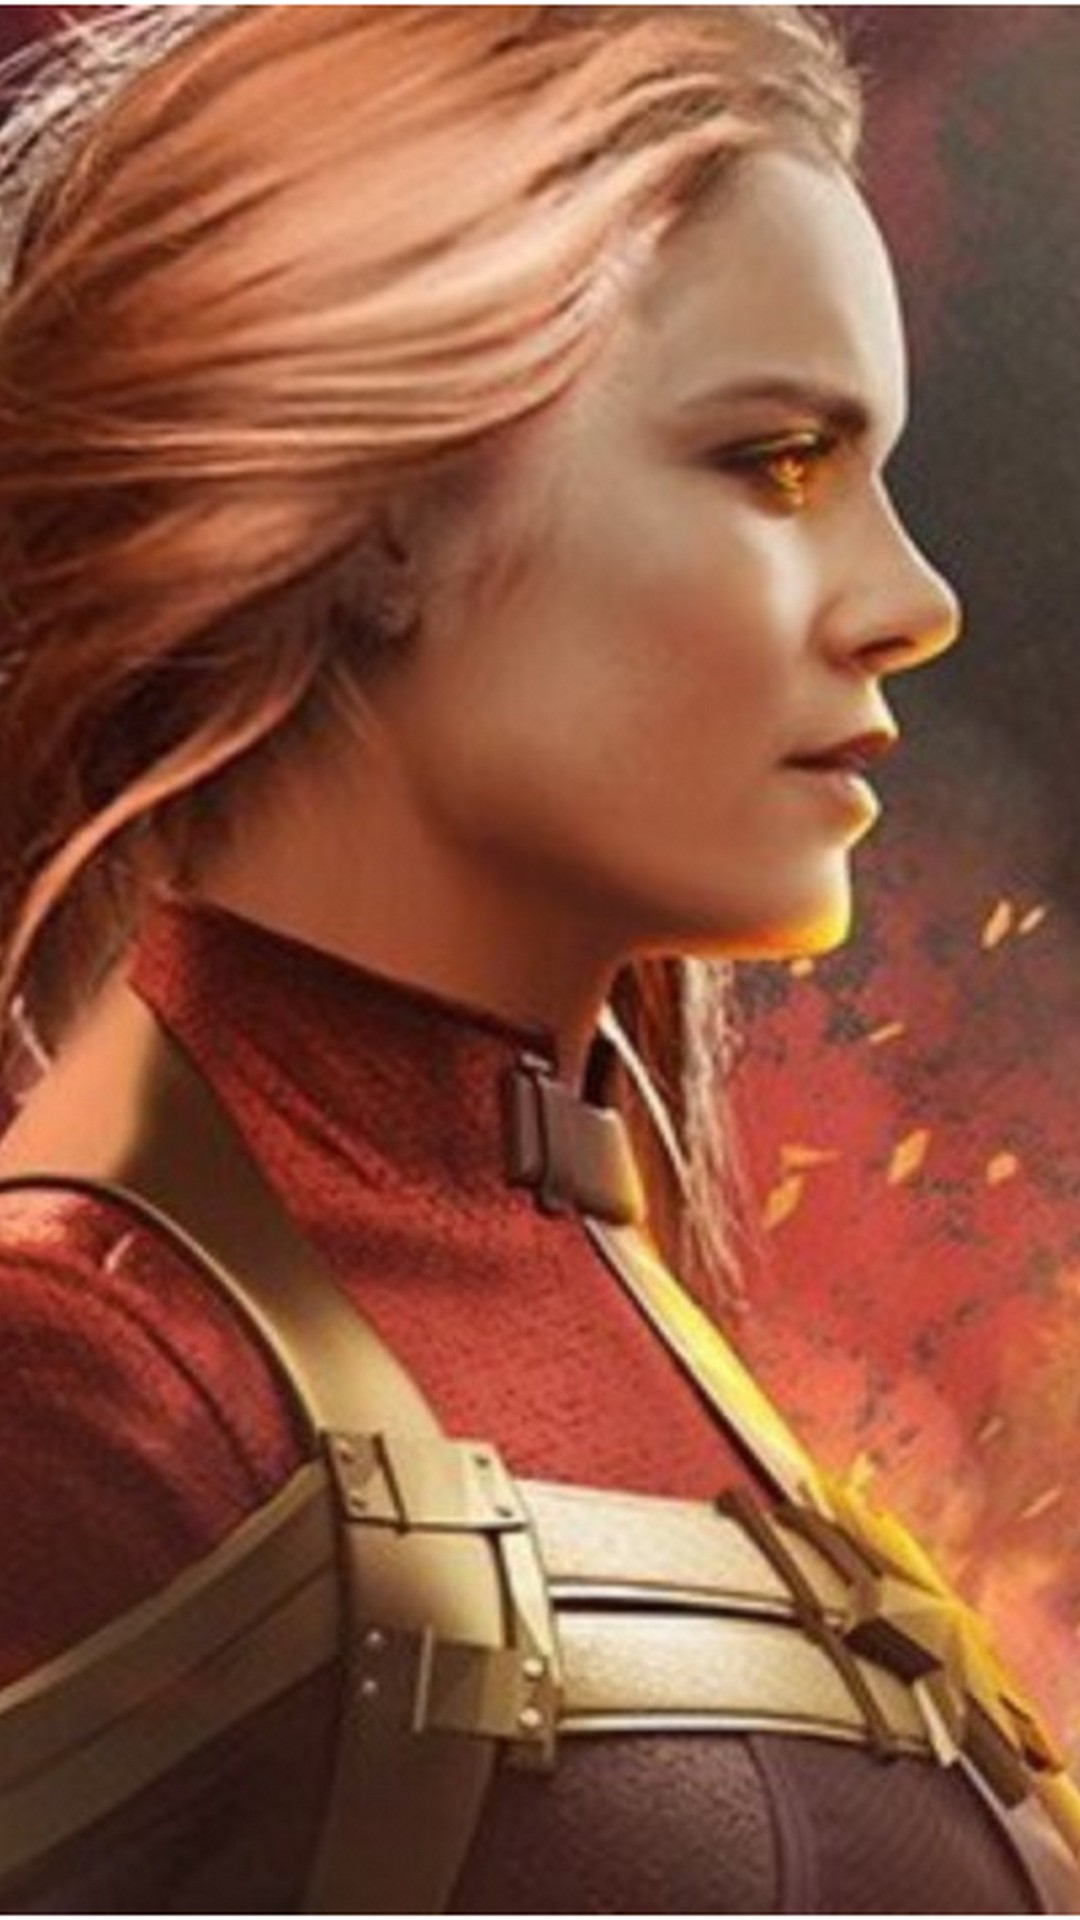 Captain Marvel Mobile Wallpaper with high-resolution 1080x1920 pixel. You can use this poster wallpaper for your Desktop Computers, Mac Screensavers, Windows Backgrounds, iPhone Wallpapers, Tablet or Android Lock screen and another Mobile device